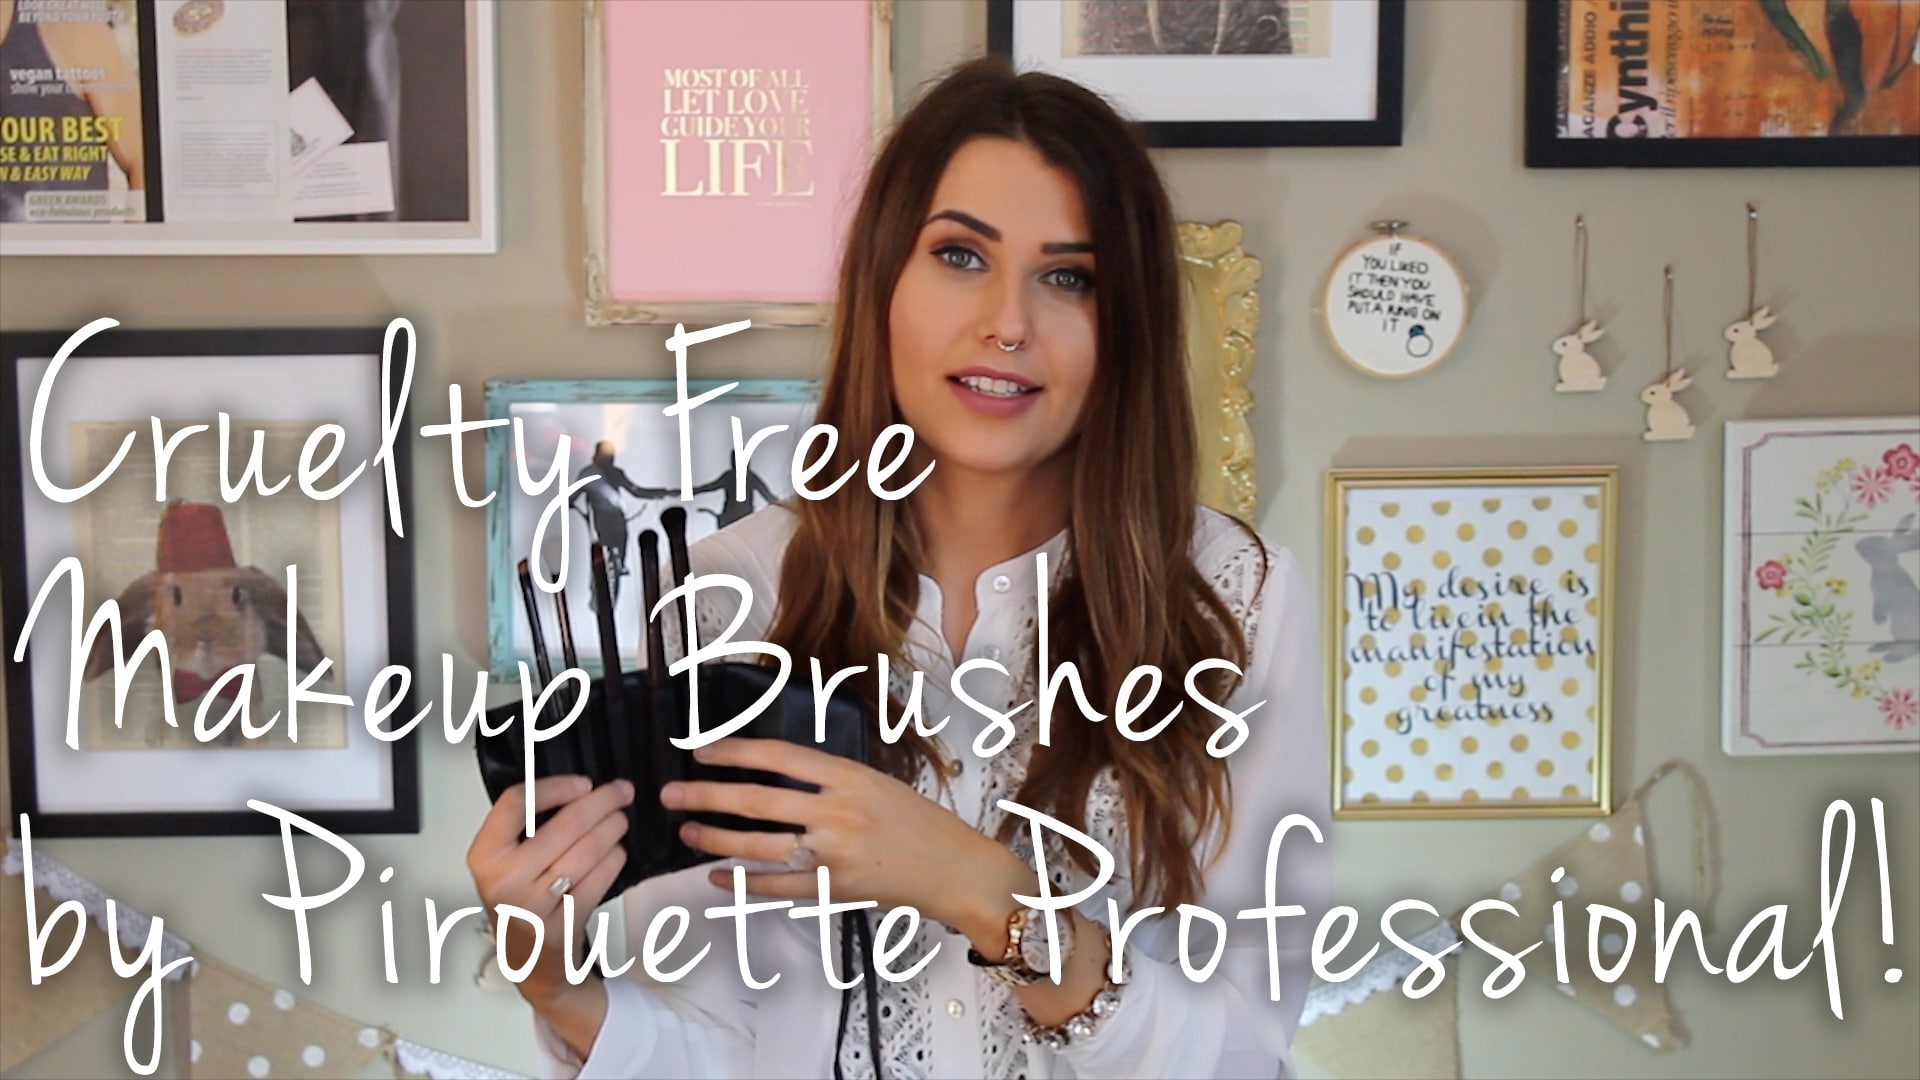 Intro to Pirouette Professionals Brushes Video